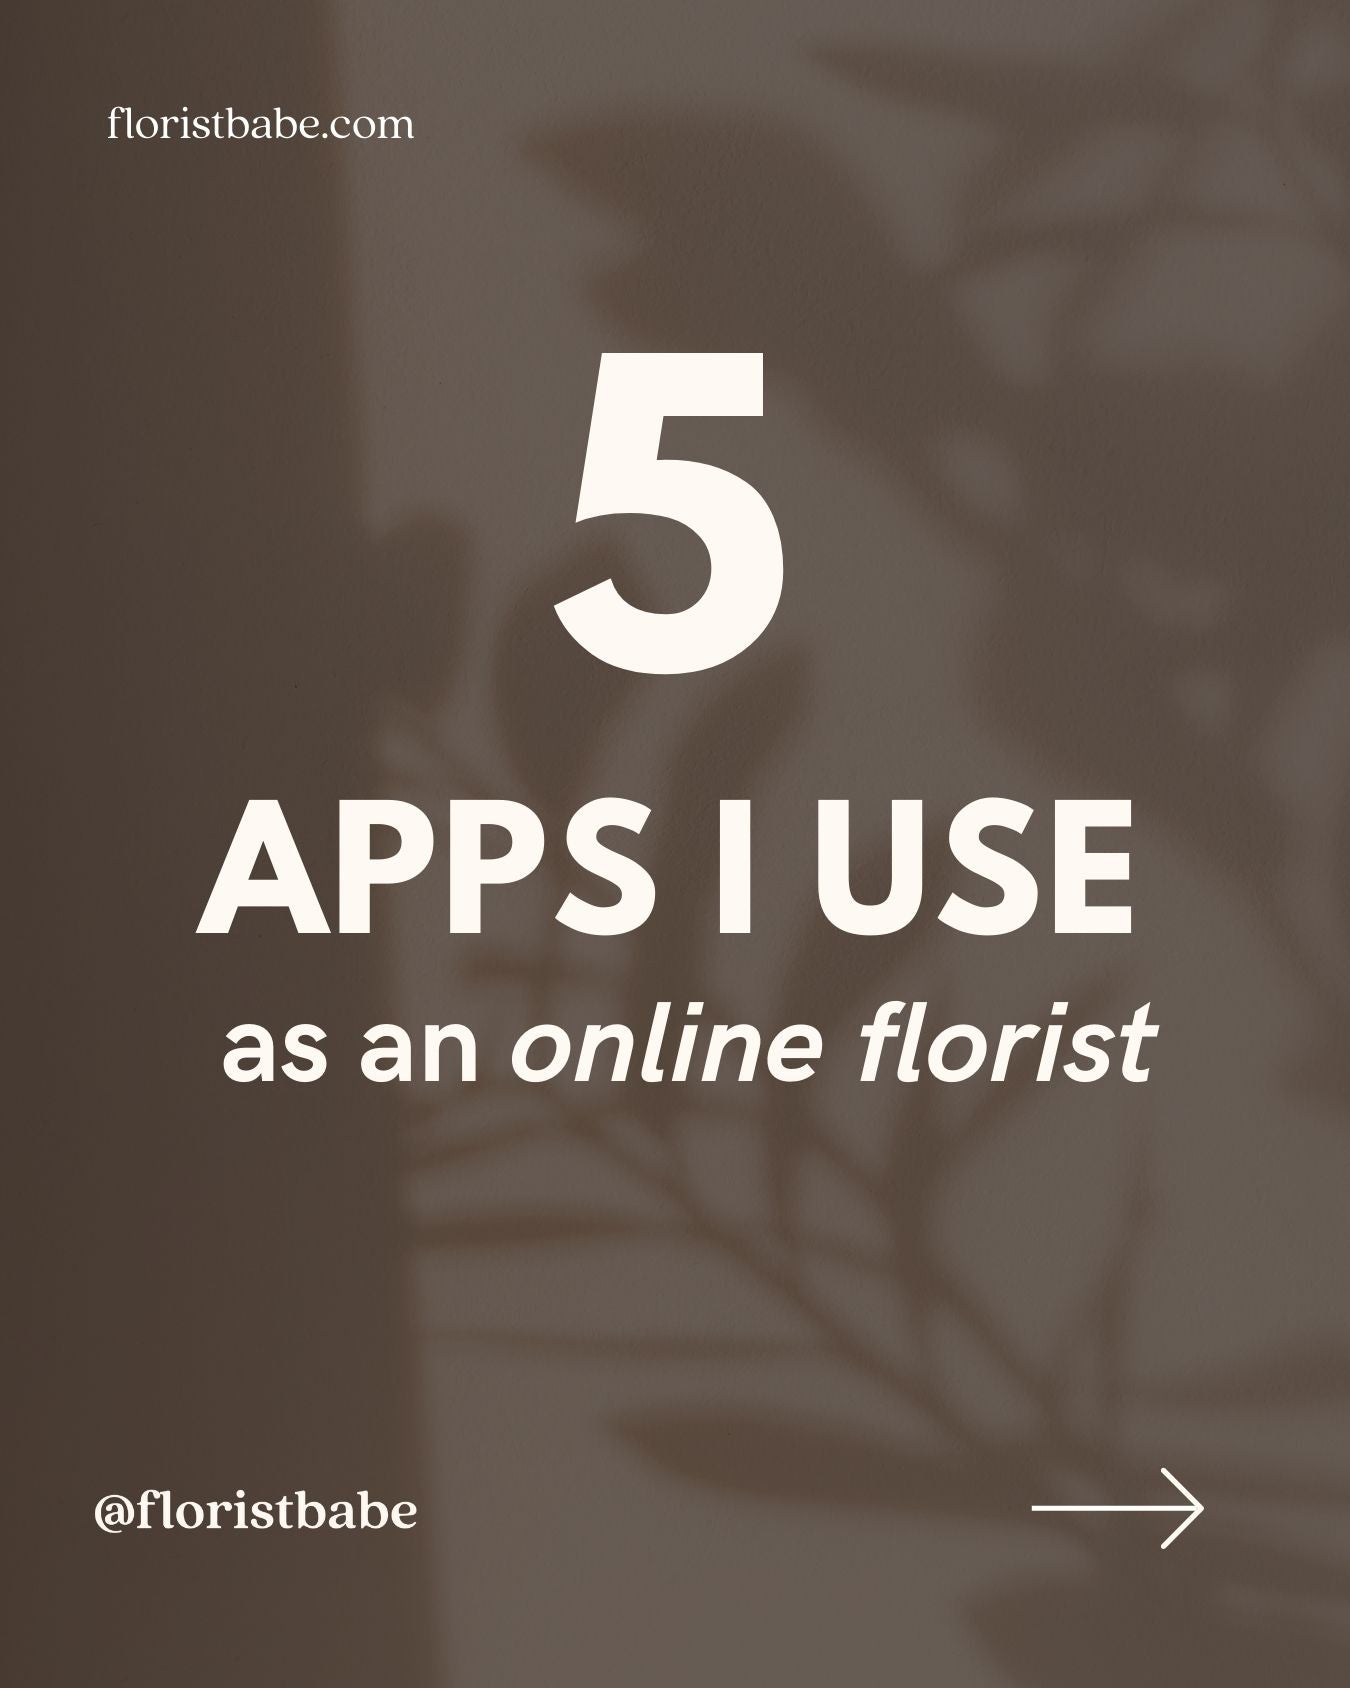 5 apps I use as an Online Florist